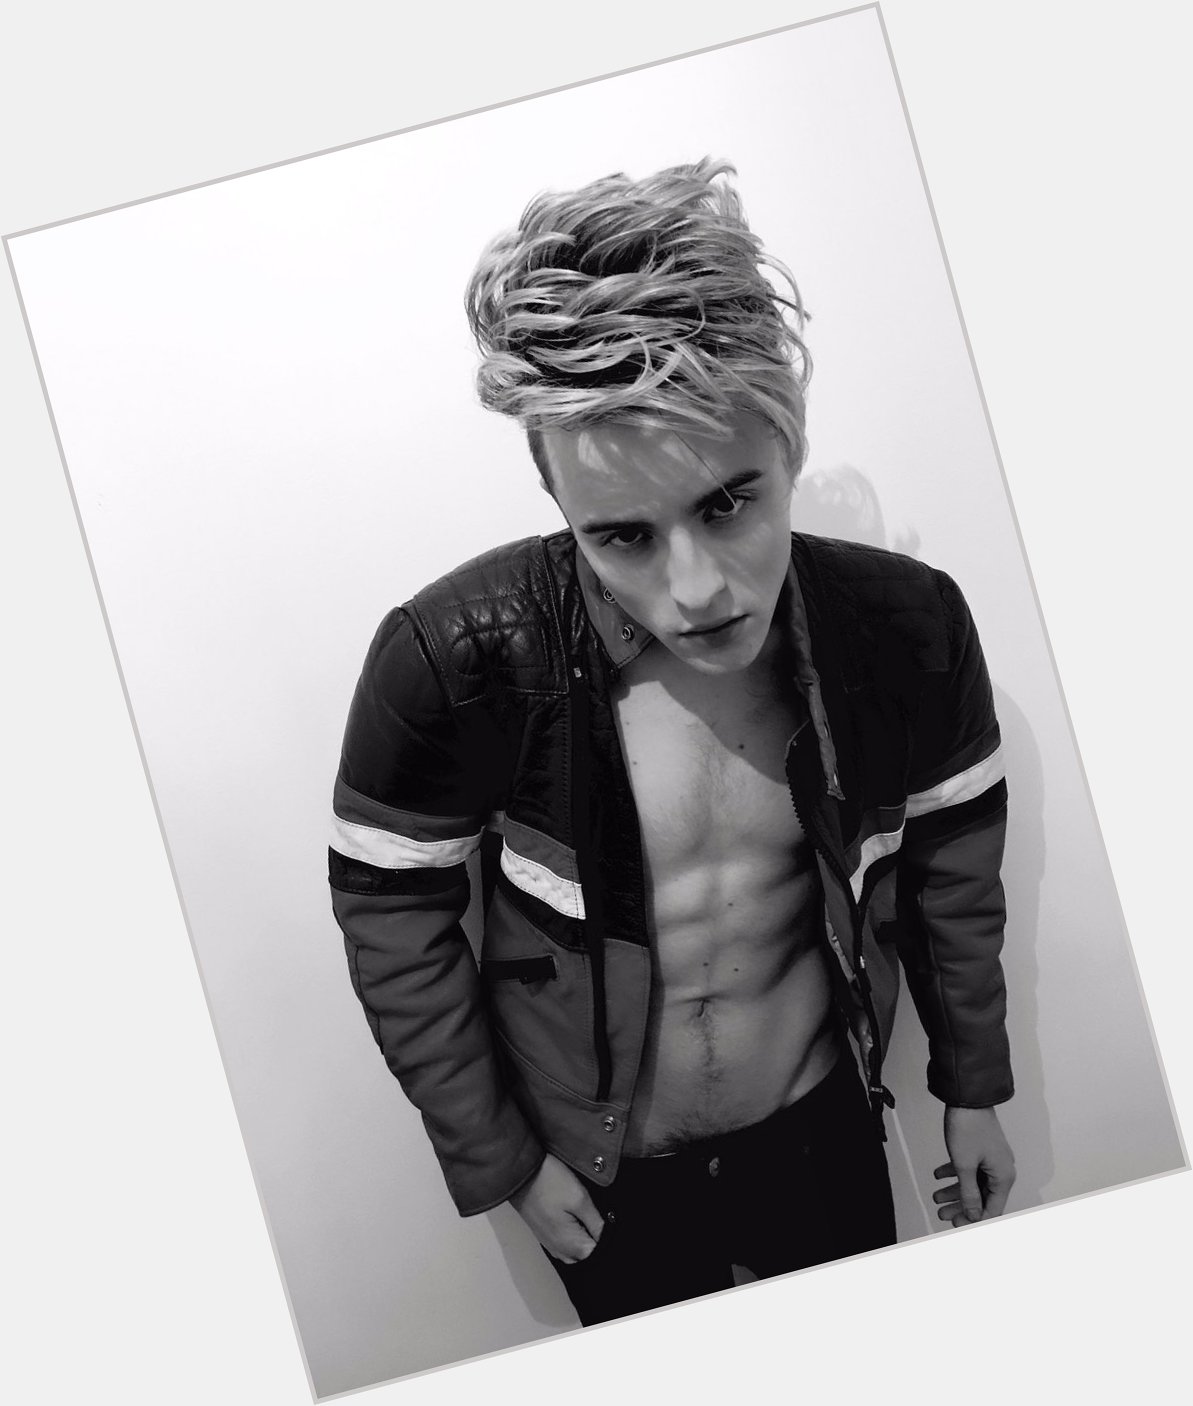 Edward Grimes Athletic body,  dyed blonde hair & hairstyles